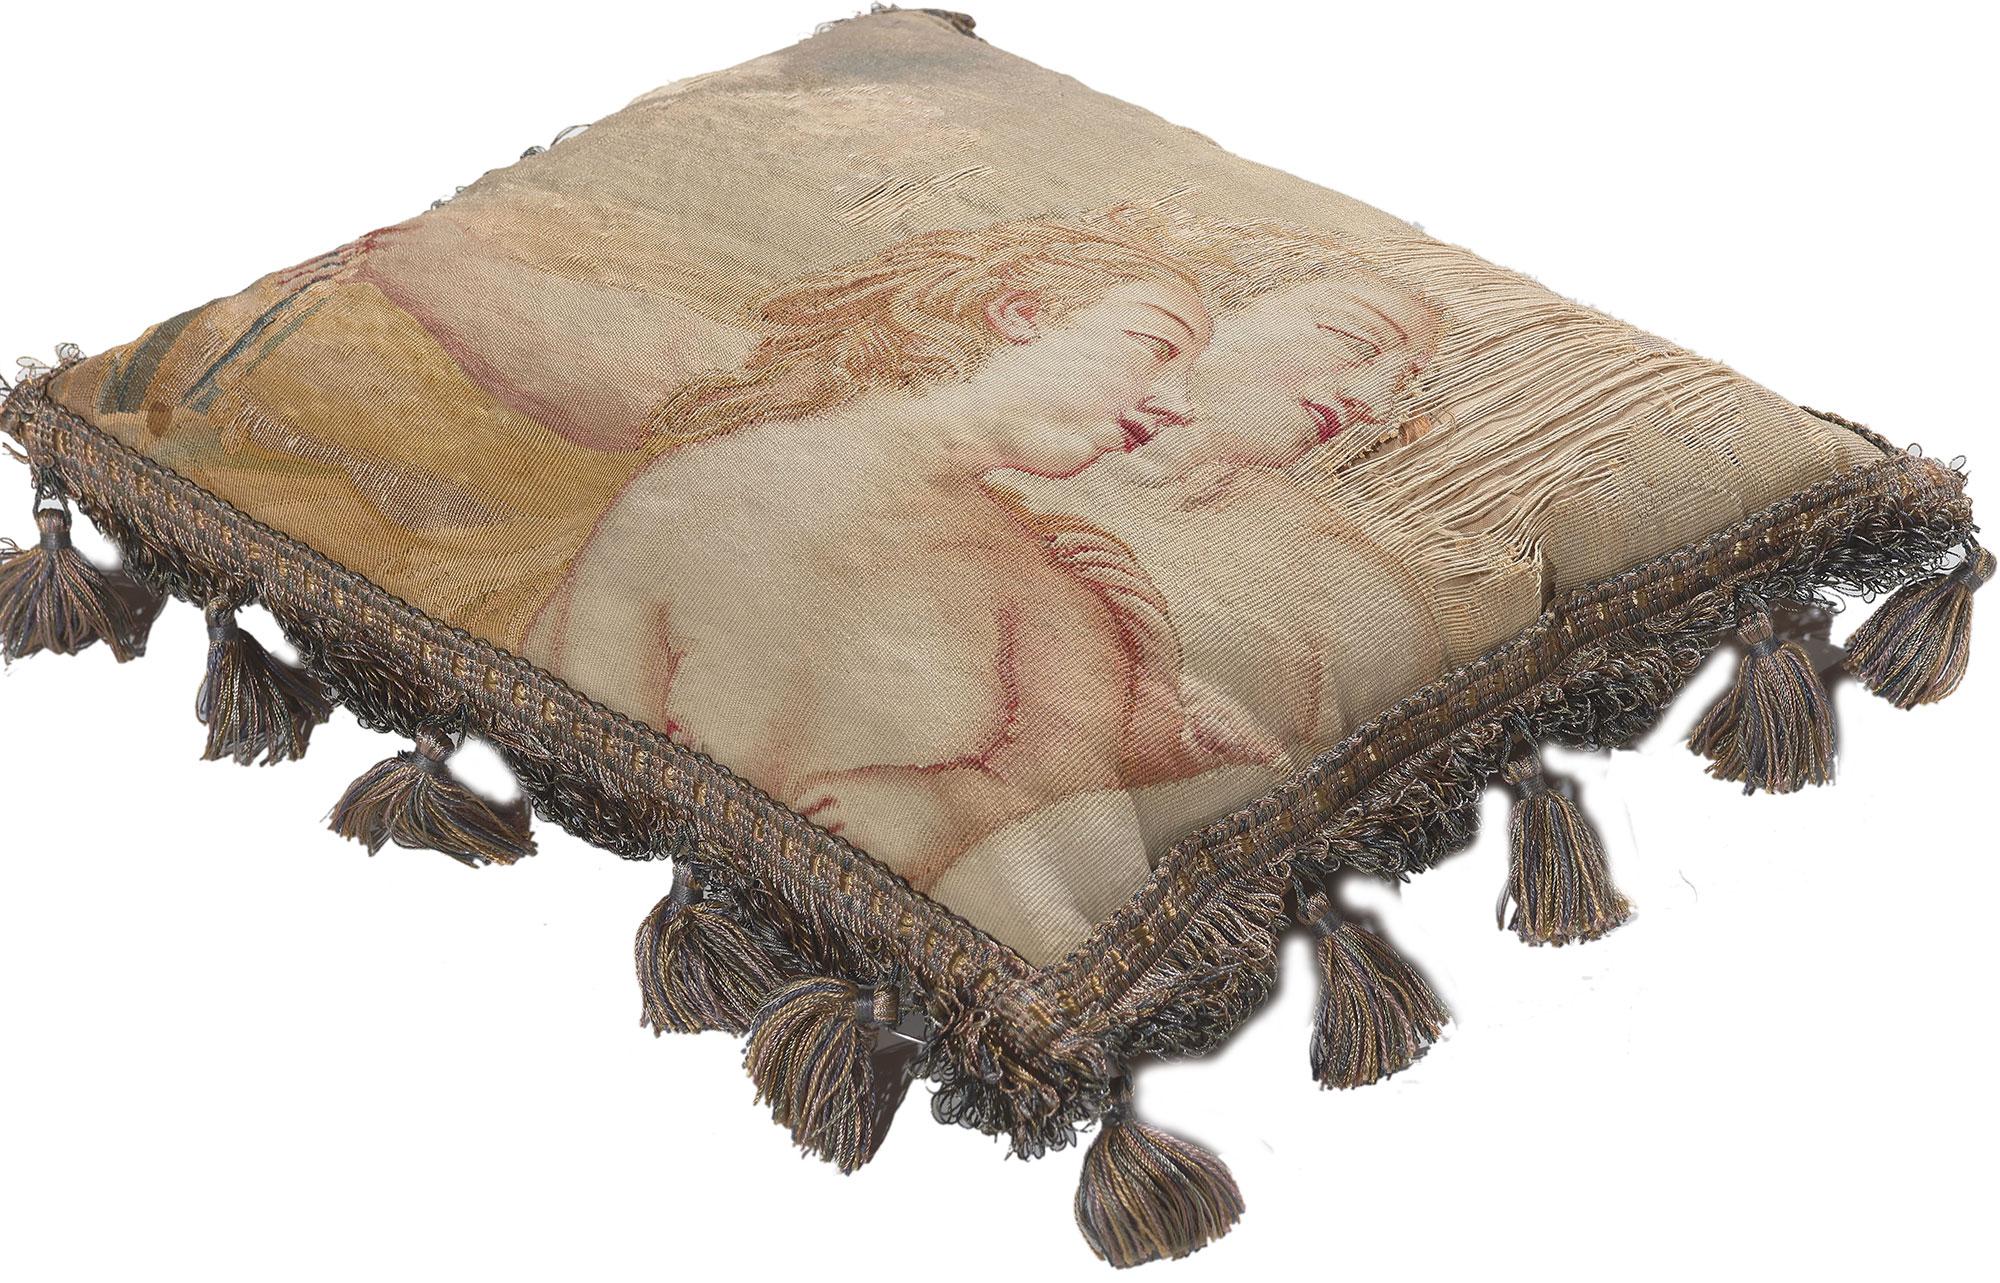 78619 Antique French Aubusson Pillow, 01'02 x 01'0. Boasting Baroque elements with elaborate detail and texture, this handwoven antique French Aubusson pillow is a captivating vision of woven beauty. The mythological design and soft earthy colors